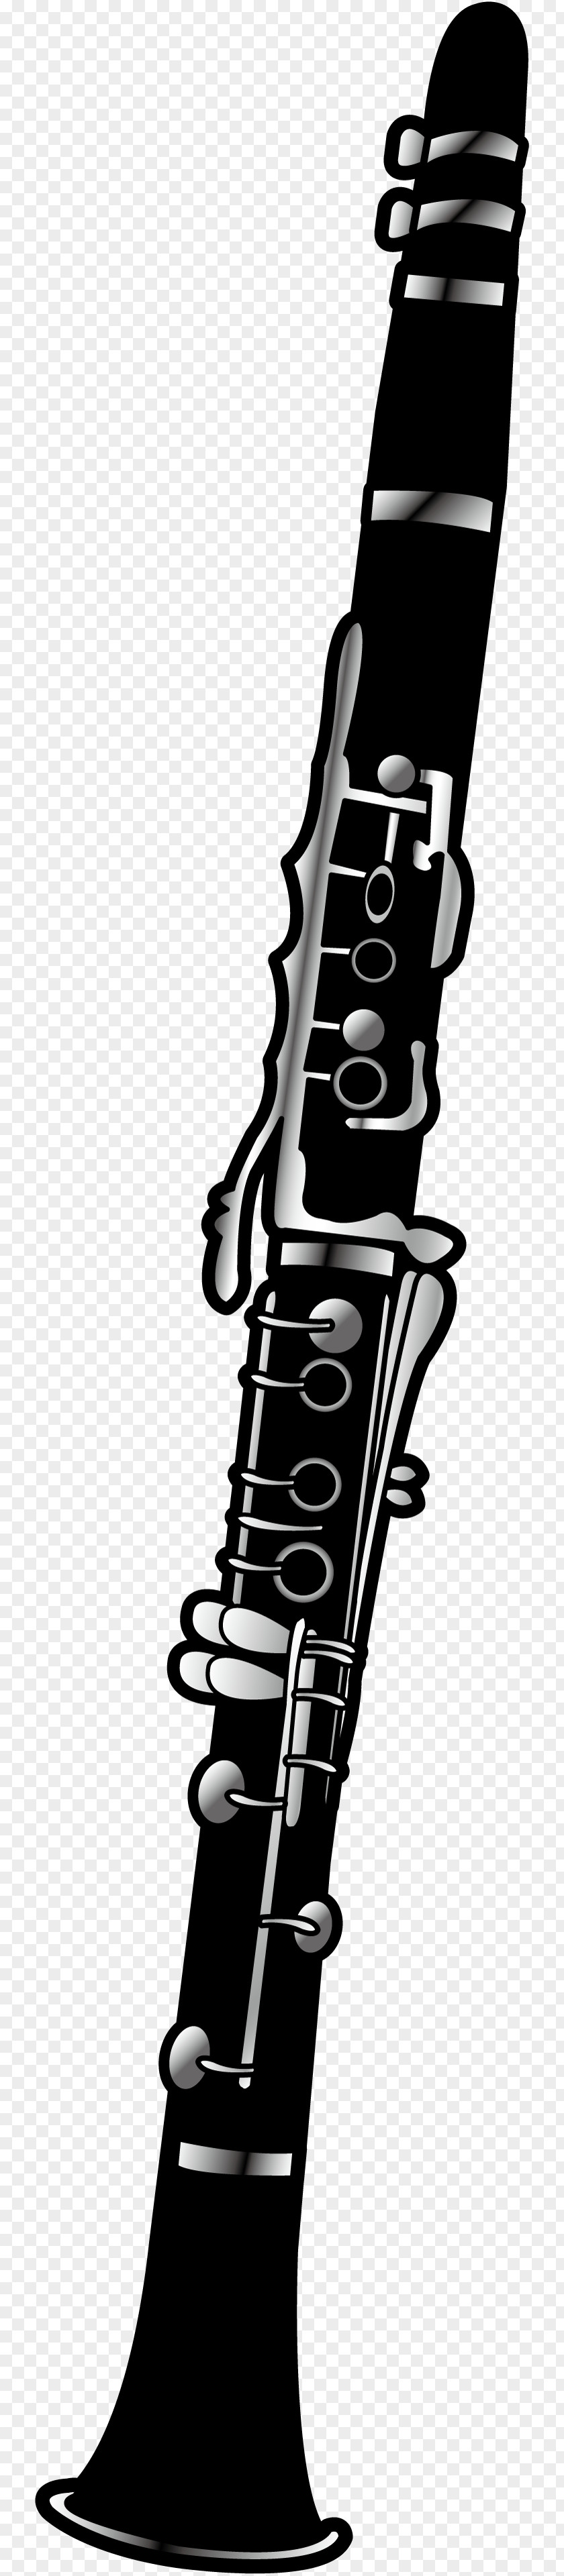 Clarinet Illustration Vector Graphics Image Music PNG